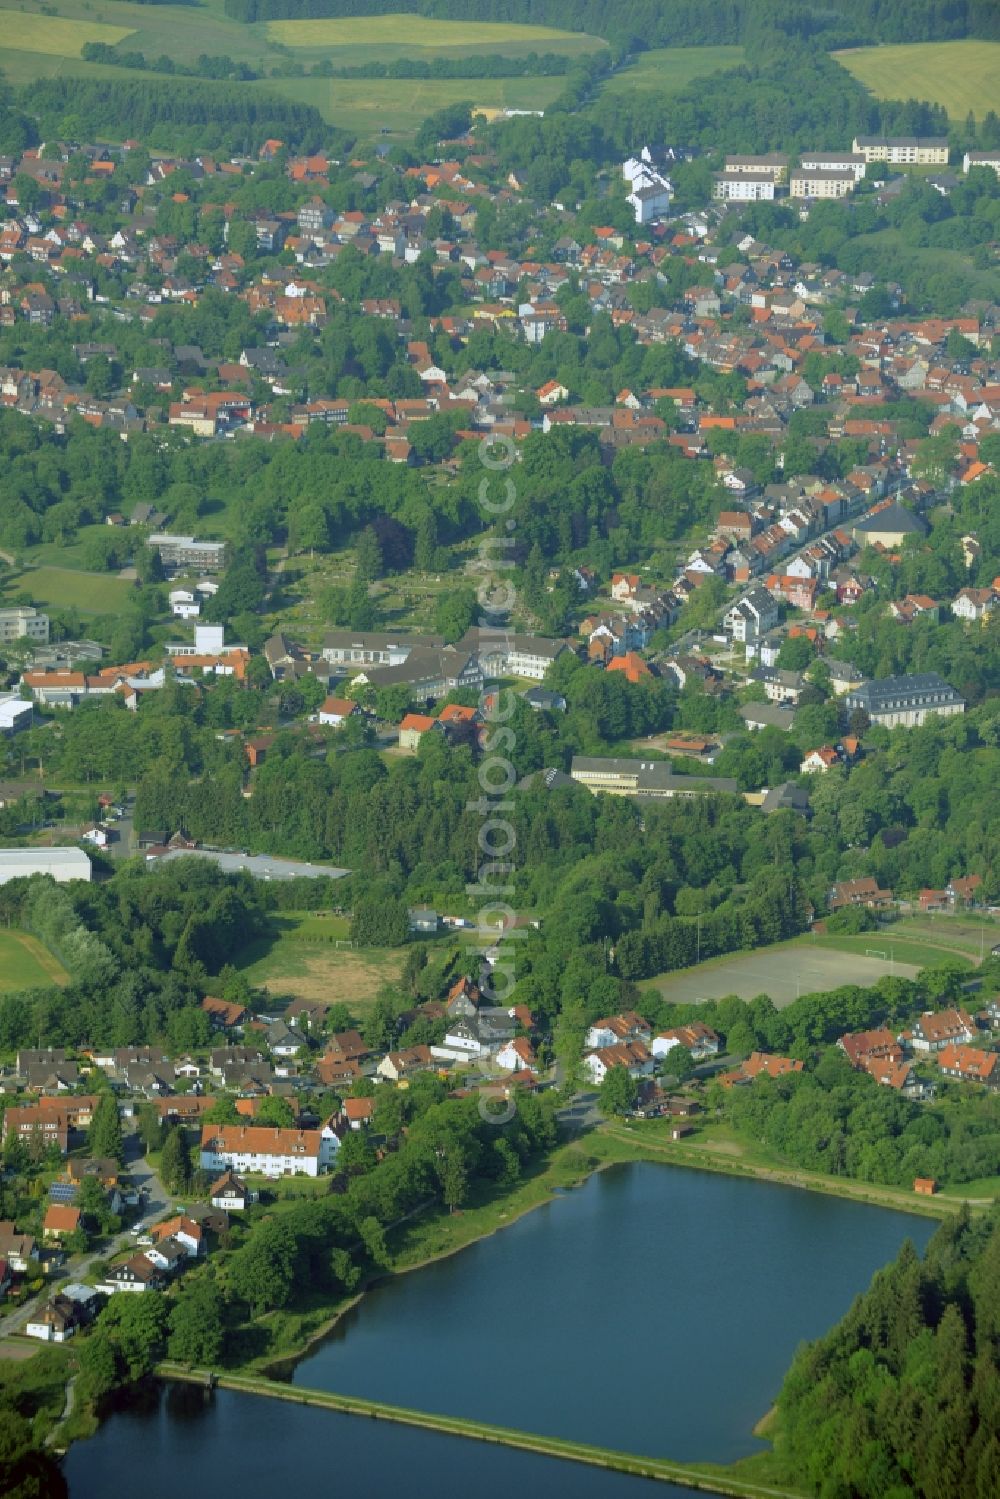 Aerial photograph Clausthal-Zellerfeld - View of the town of Clausthal-Zellerfeld in the state of Lower Saxony. The mountain and university town is an official spa resort in the county district of Goslar. Two ponds are located in the East of the town which is the location of the Technical University of Clausthal